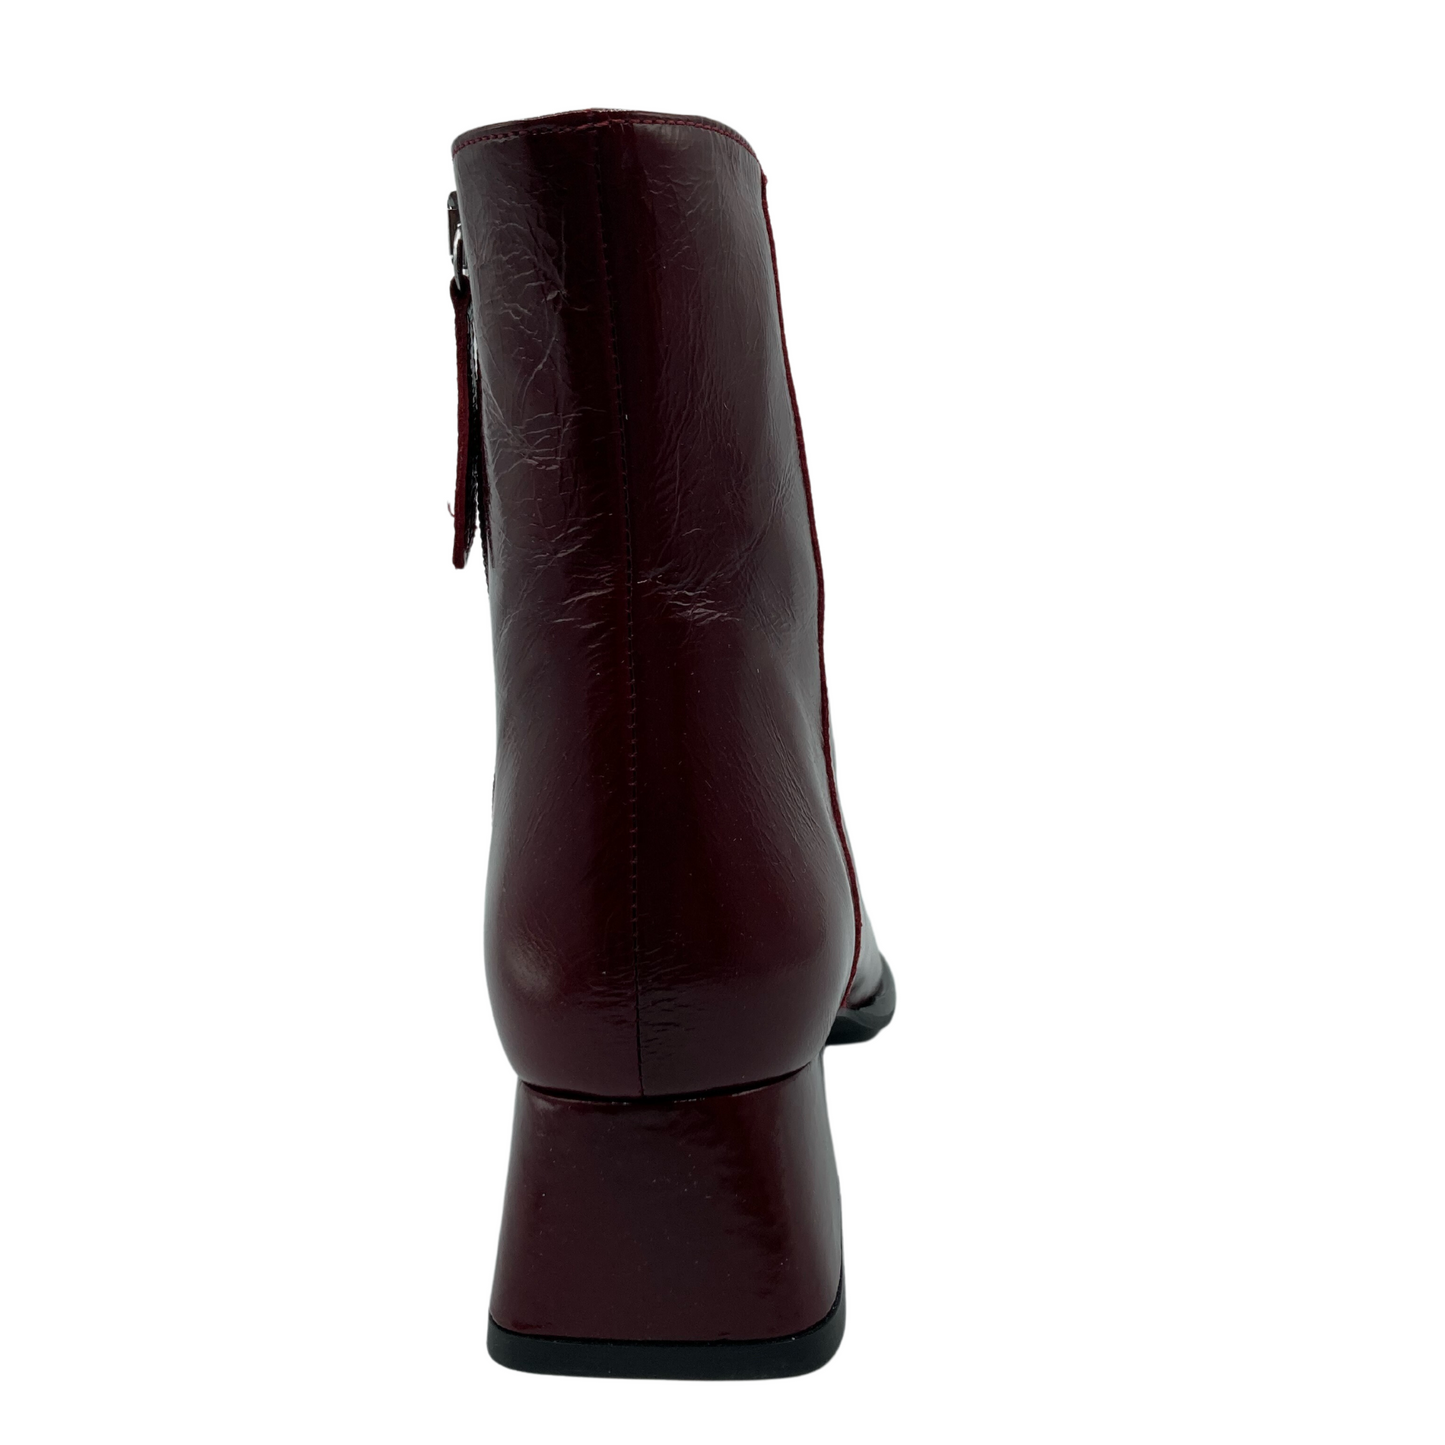 Back view of red leather short boot with flared heel and side zipper closure